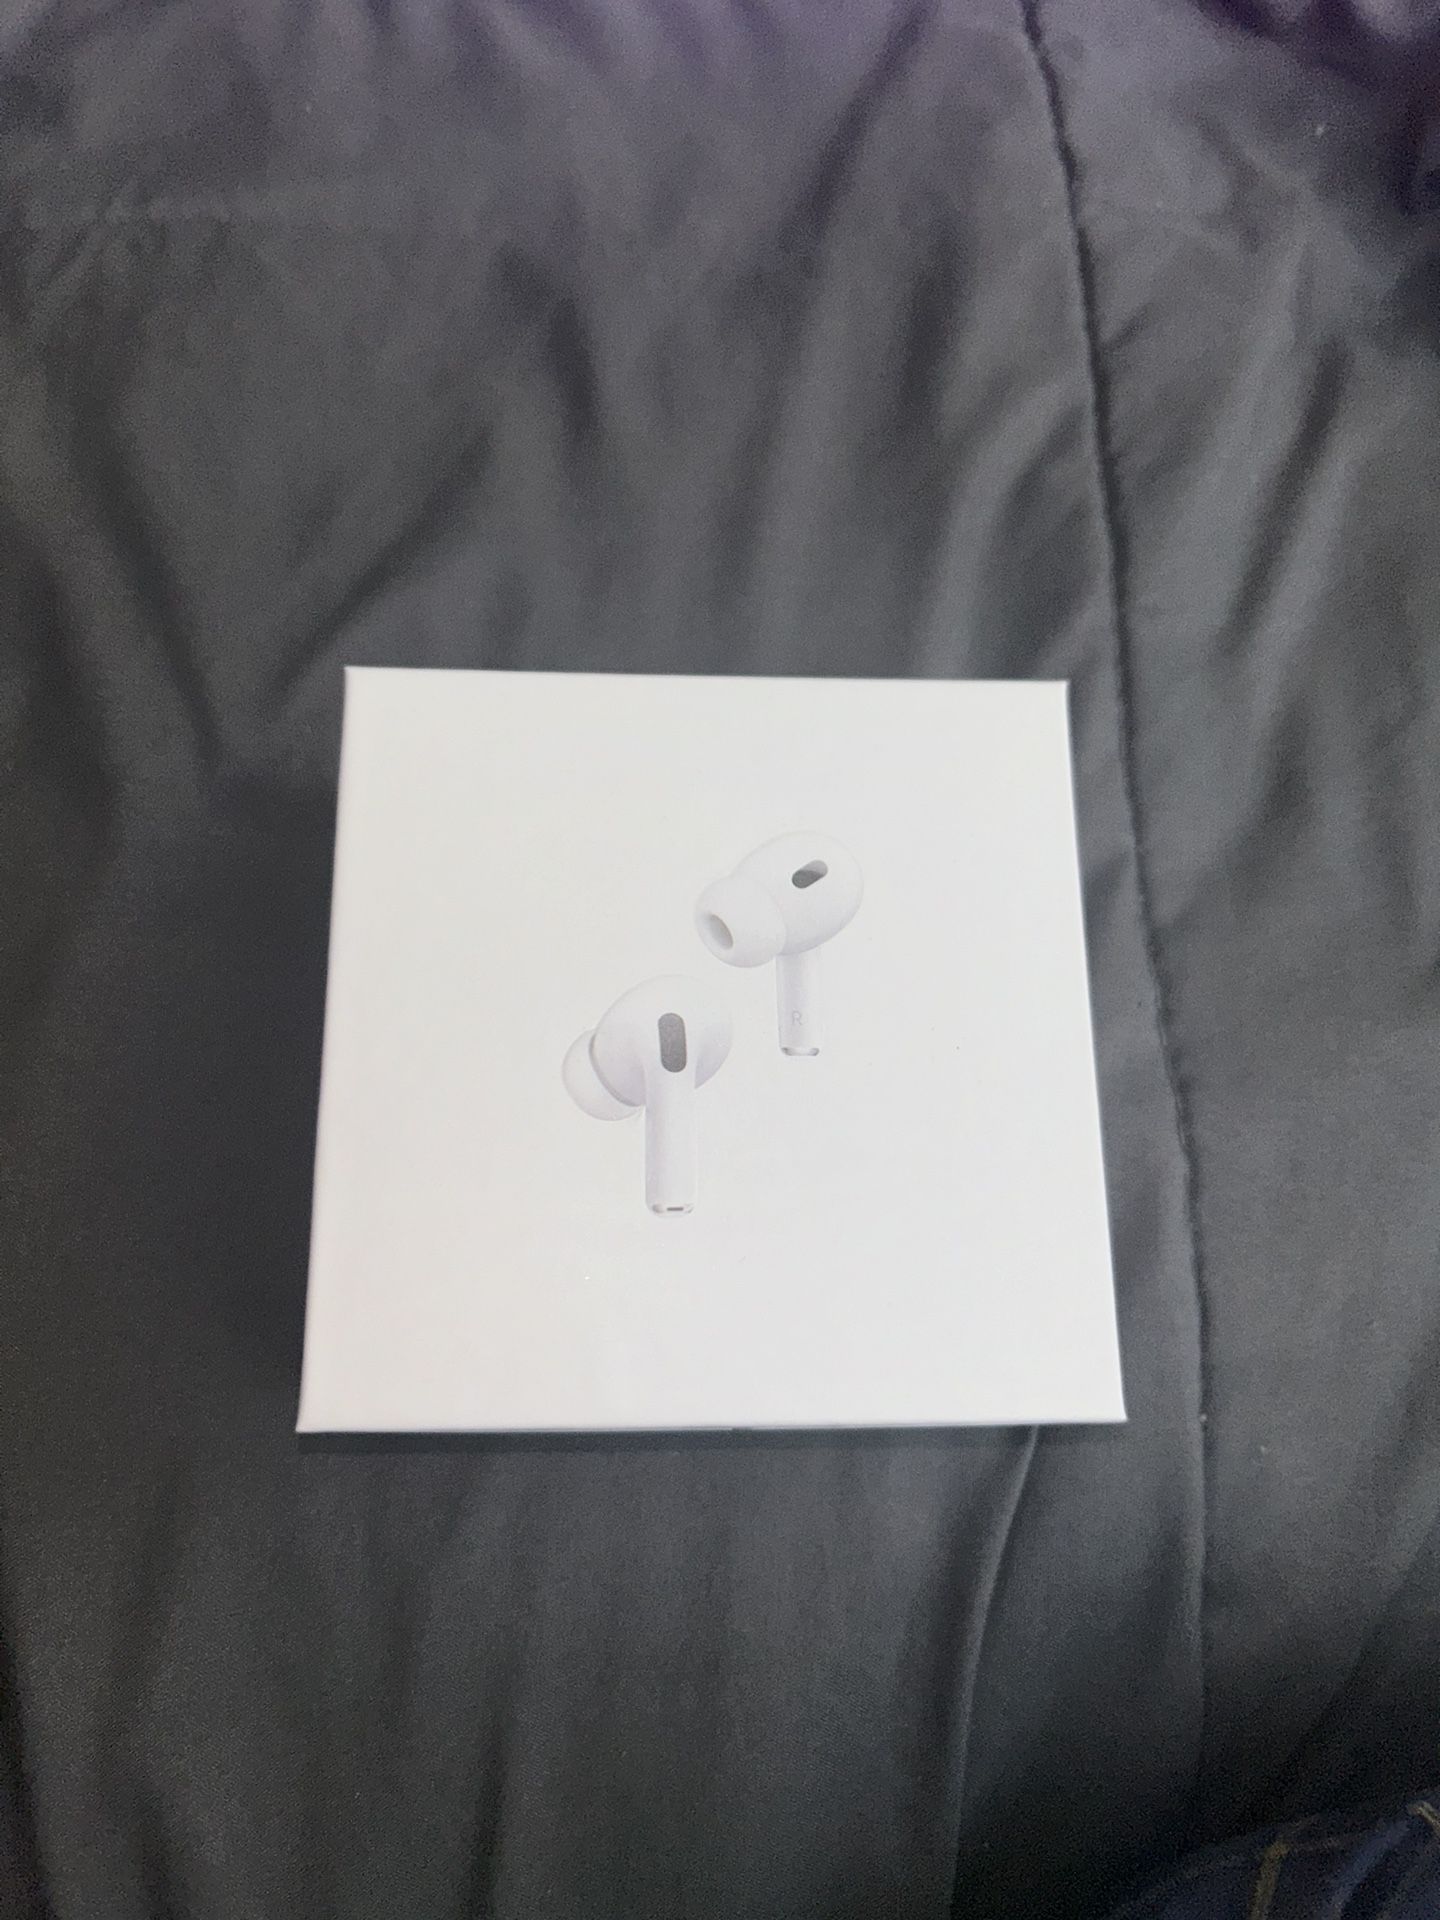 Apple AirPods Pro 2nd Generation with Charging Case in White